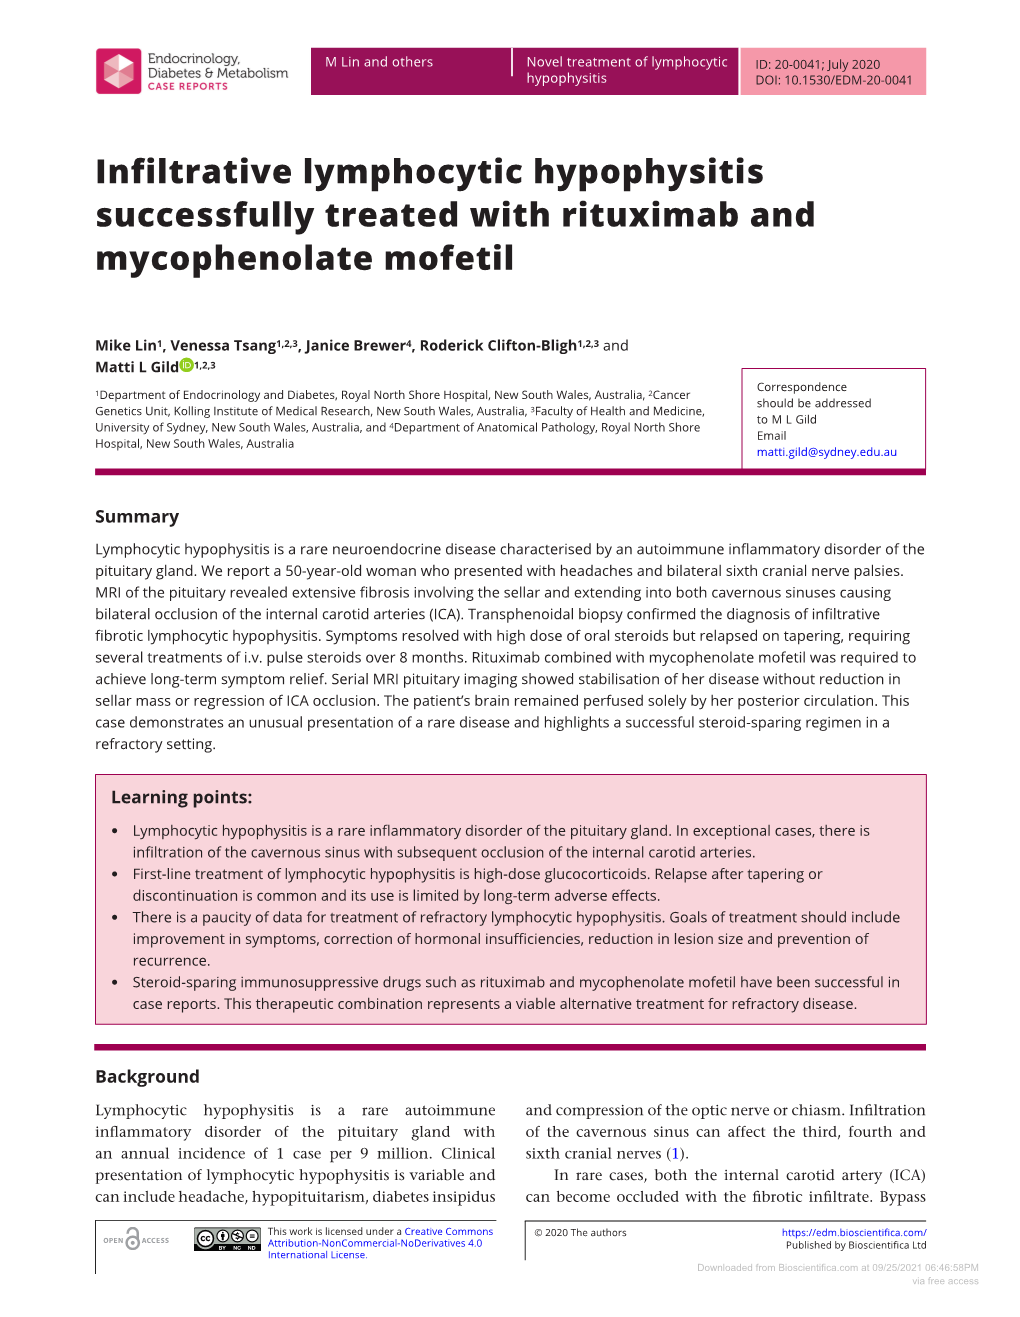 Infiltrative Lymphocytic Hypophysitis Successfully Treated with Rituximab and Mycophenolate Mofetil